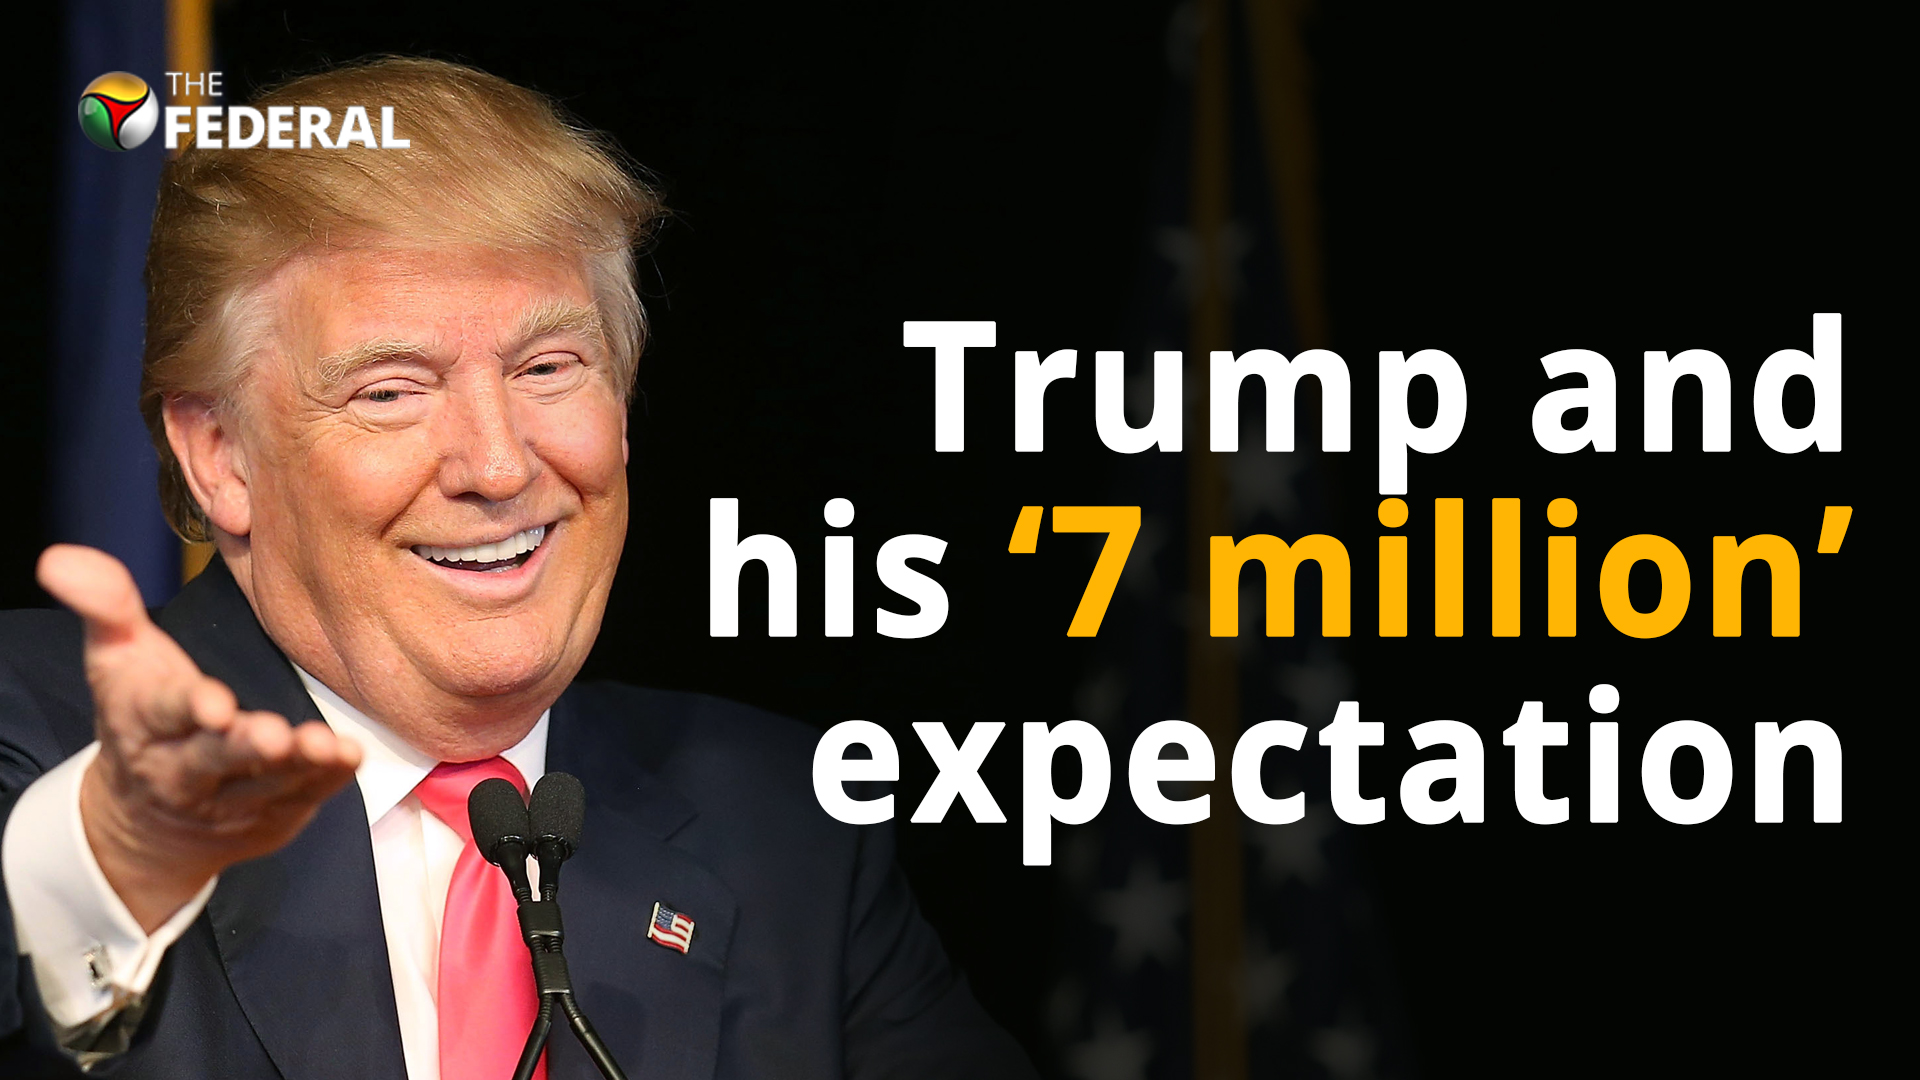 Trump and his ‘7 million’ expectation